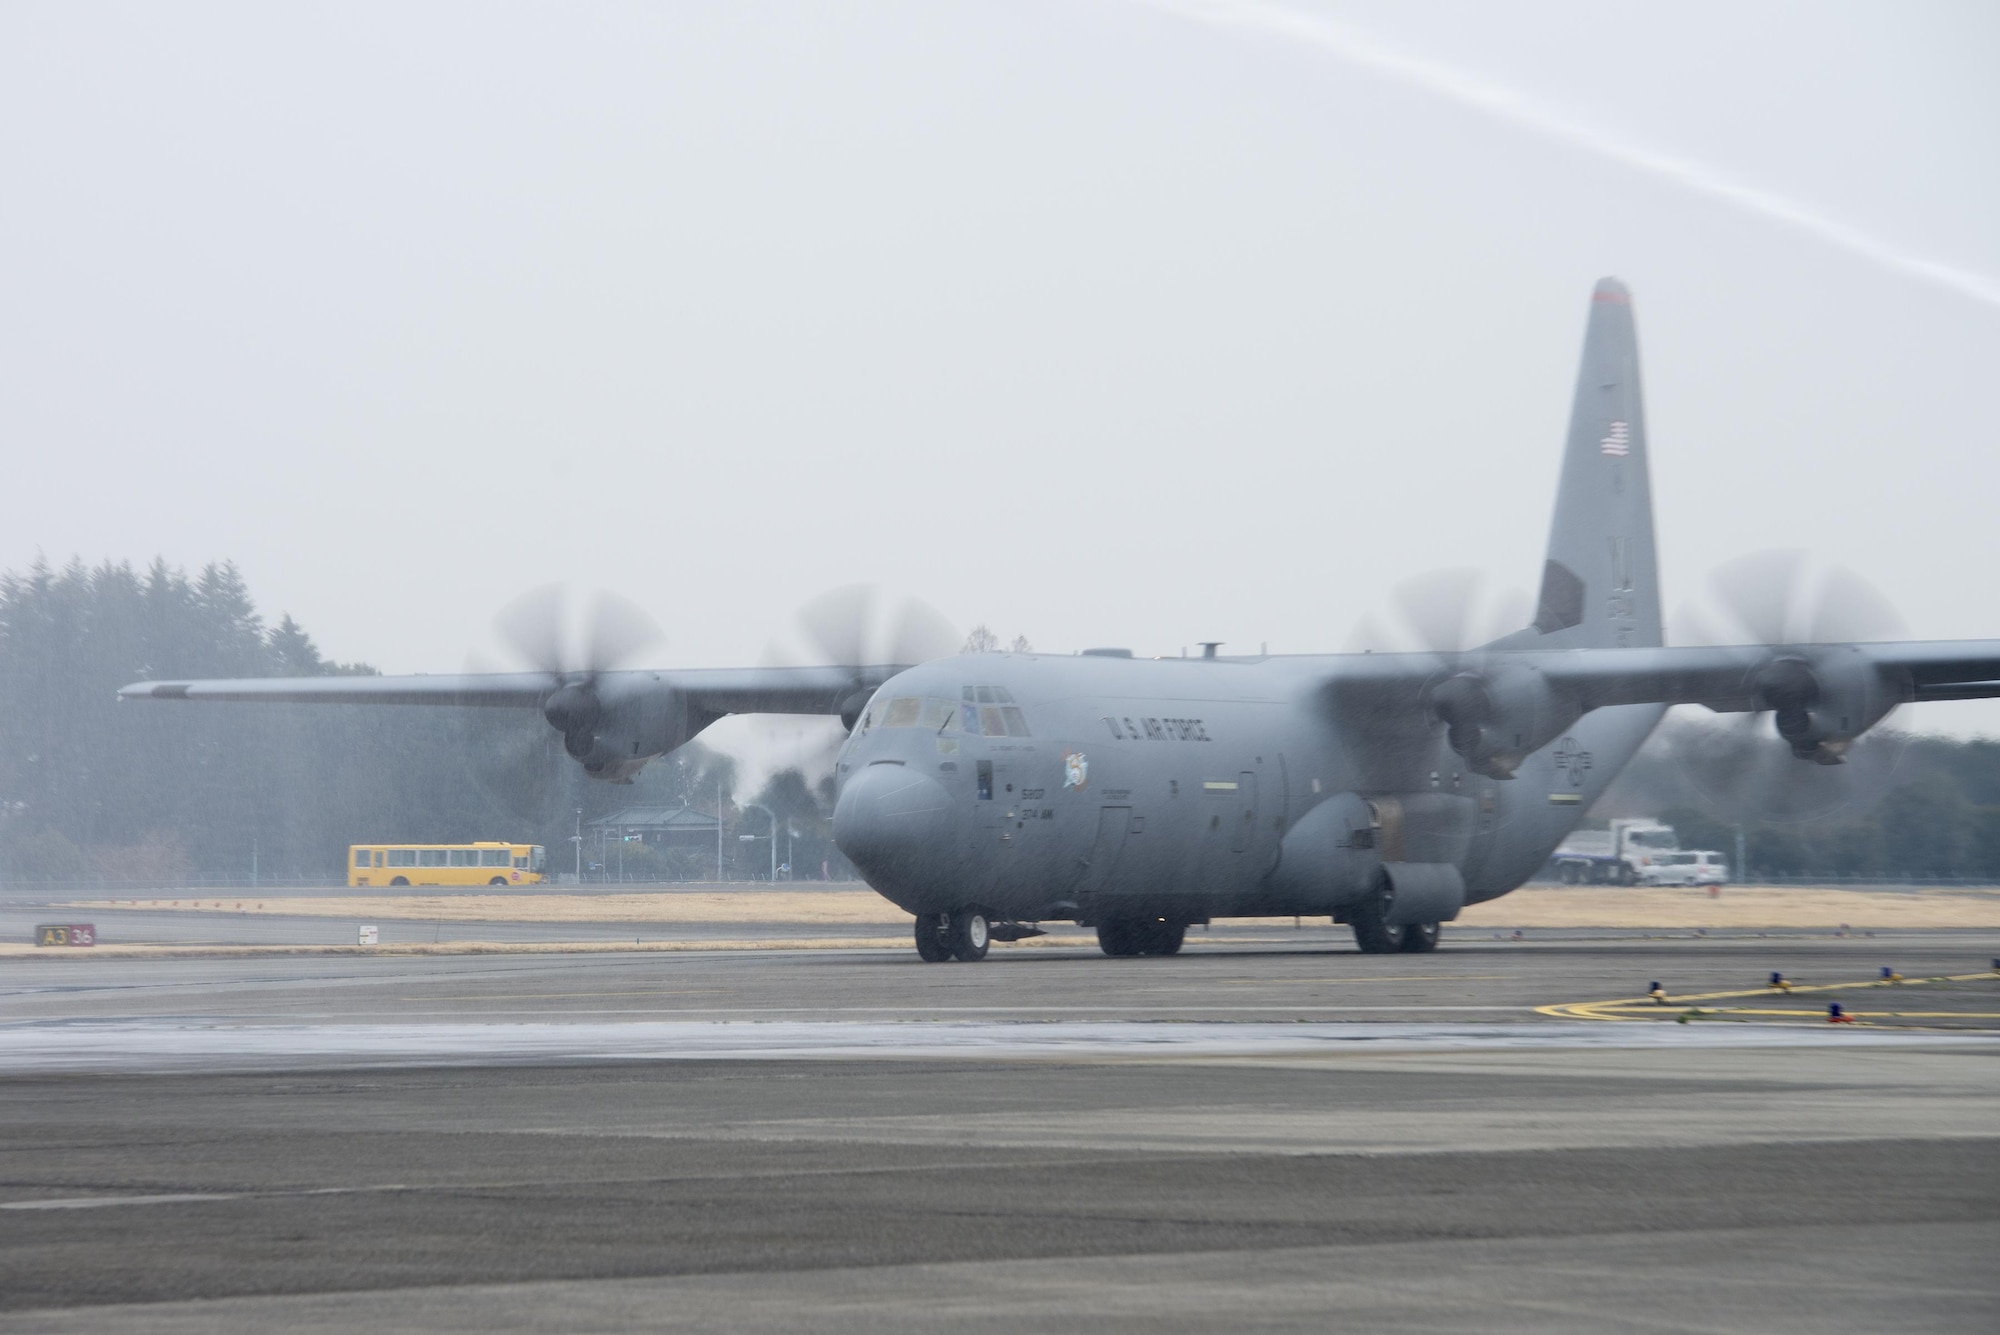 The first C-130J Super Hercules to be assigned to U.S. Pacific Air Forces taxis through a water salute at Yokota Air Base, Japan, Mar. 6, 2017. The new aircraft is scheduled to have fully replaced the 374th Airlift Wing's C-130 Hercules fleet by 2018. (U.S. Air Force photo by Senior Airman David C. Danford)